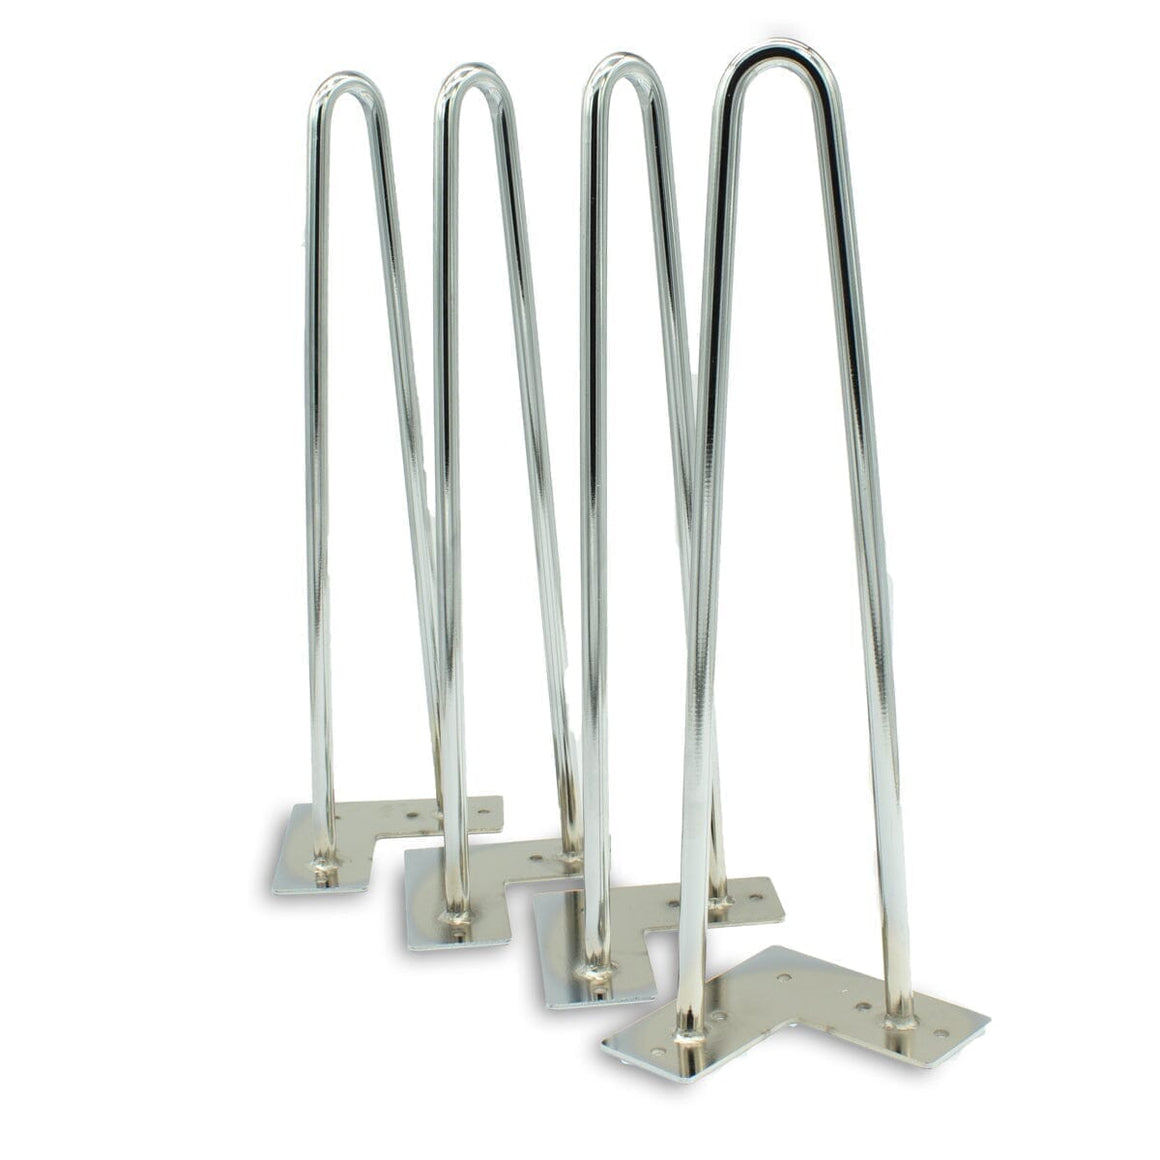 Premium Inclined Hairpin Table Legs - 2 Rod 16"- Chrome Steel - Set of 4 - Rustic Deco Incorporated